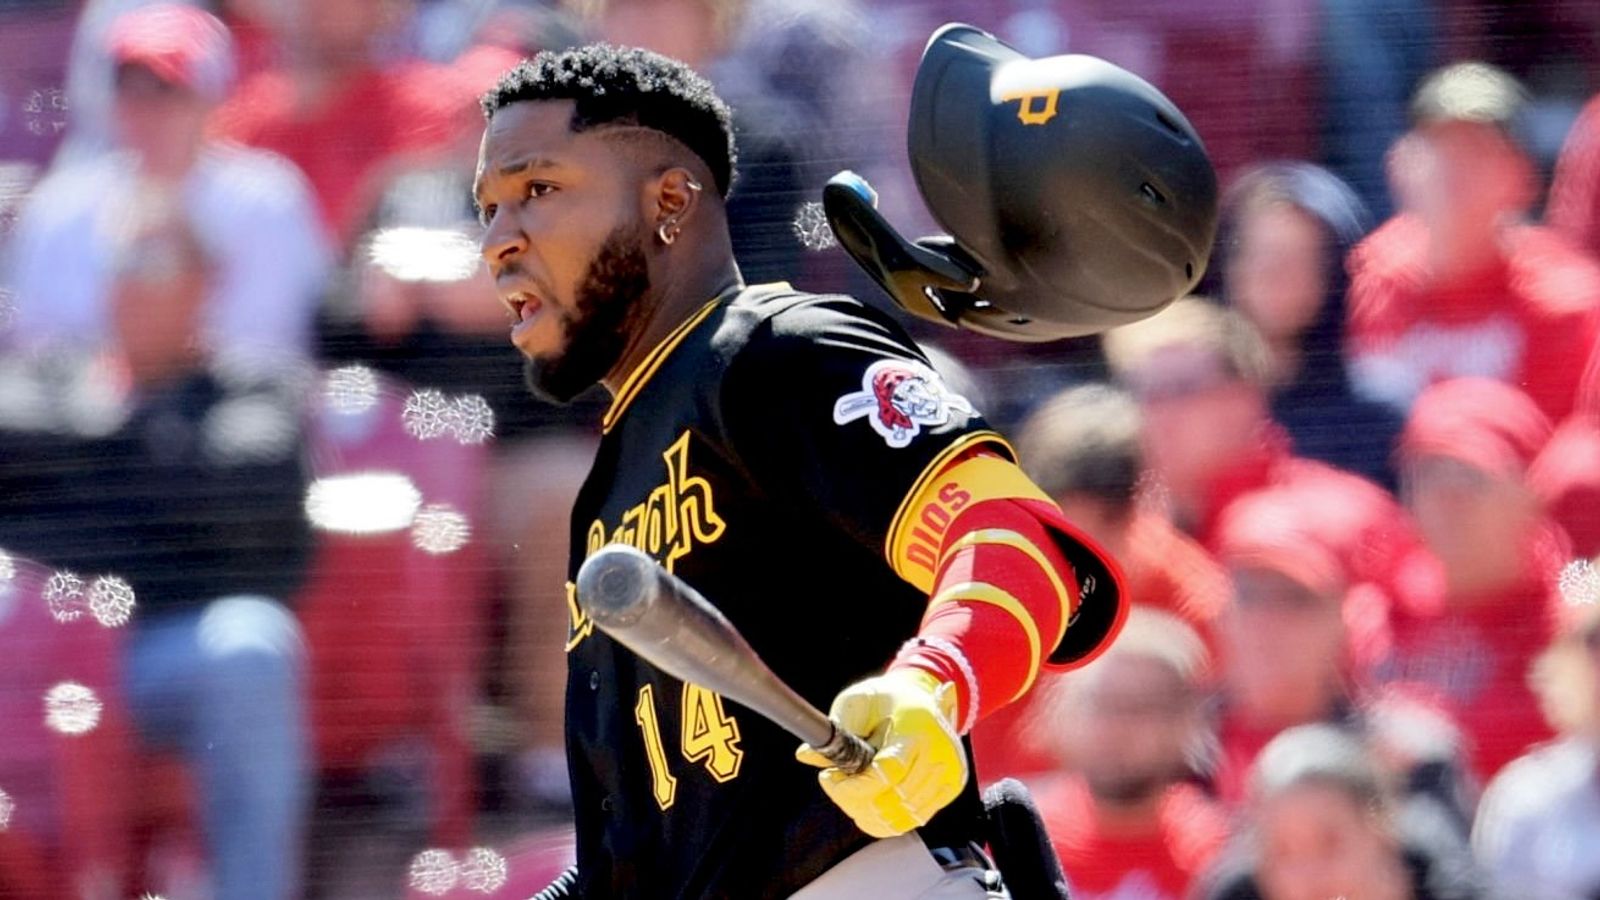 Pirates run into familiar problem with new group of hitters